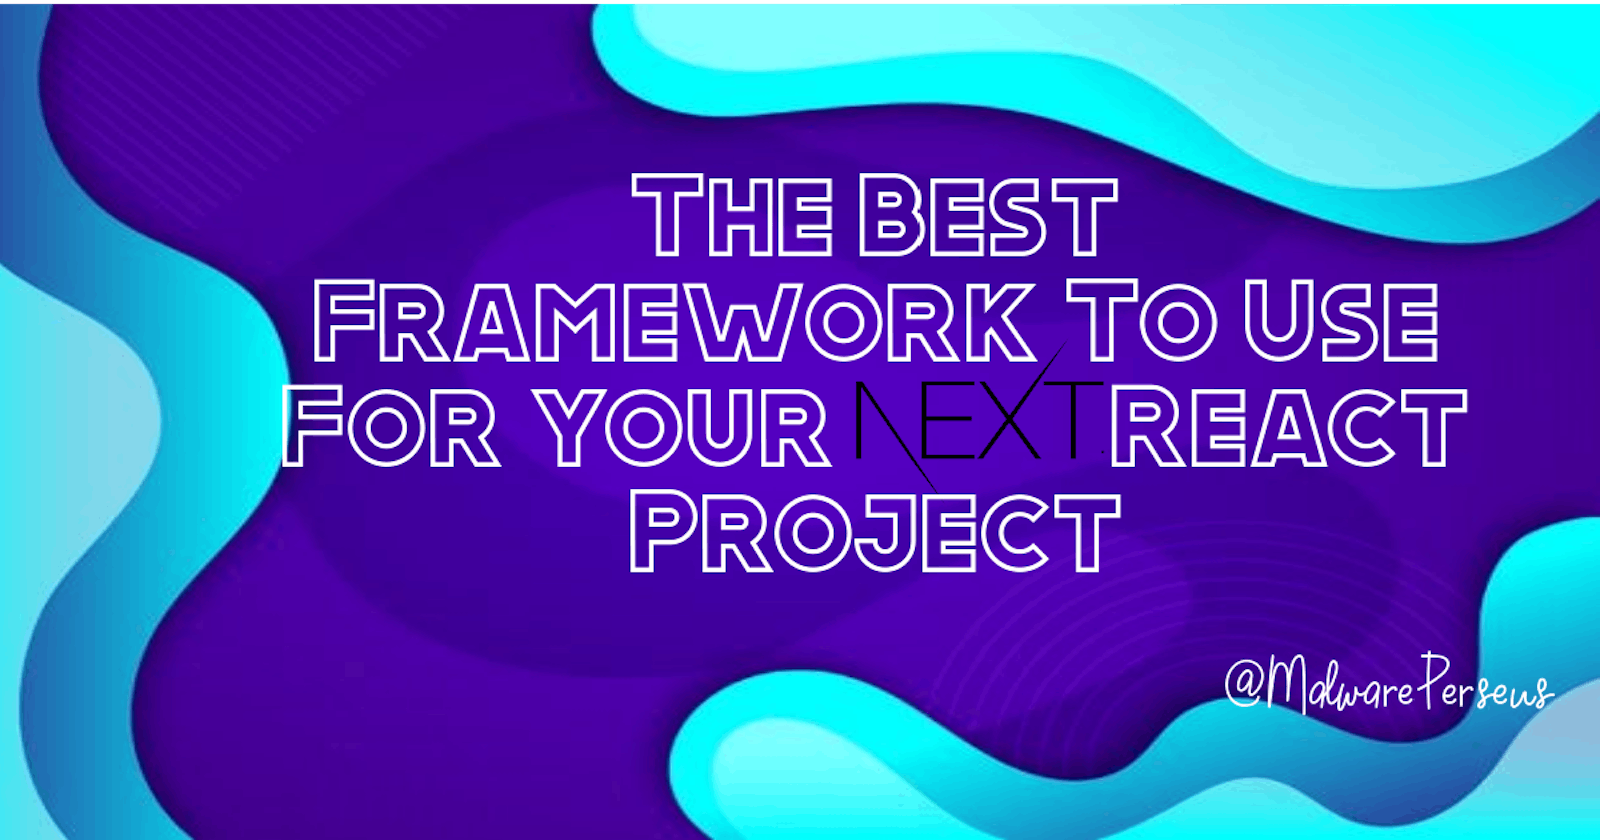 The Best Framework To Use For Your Next(.js) React Project